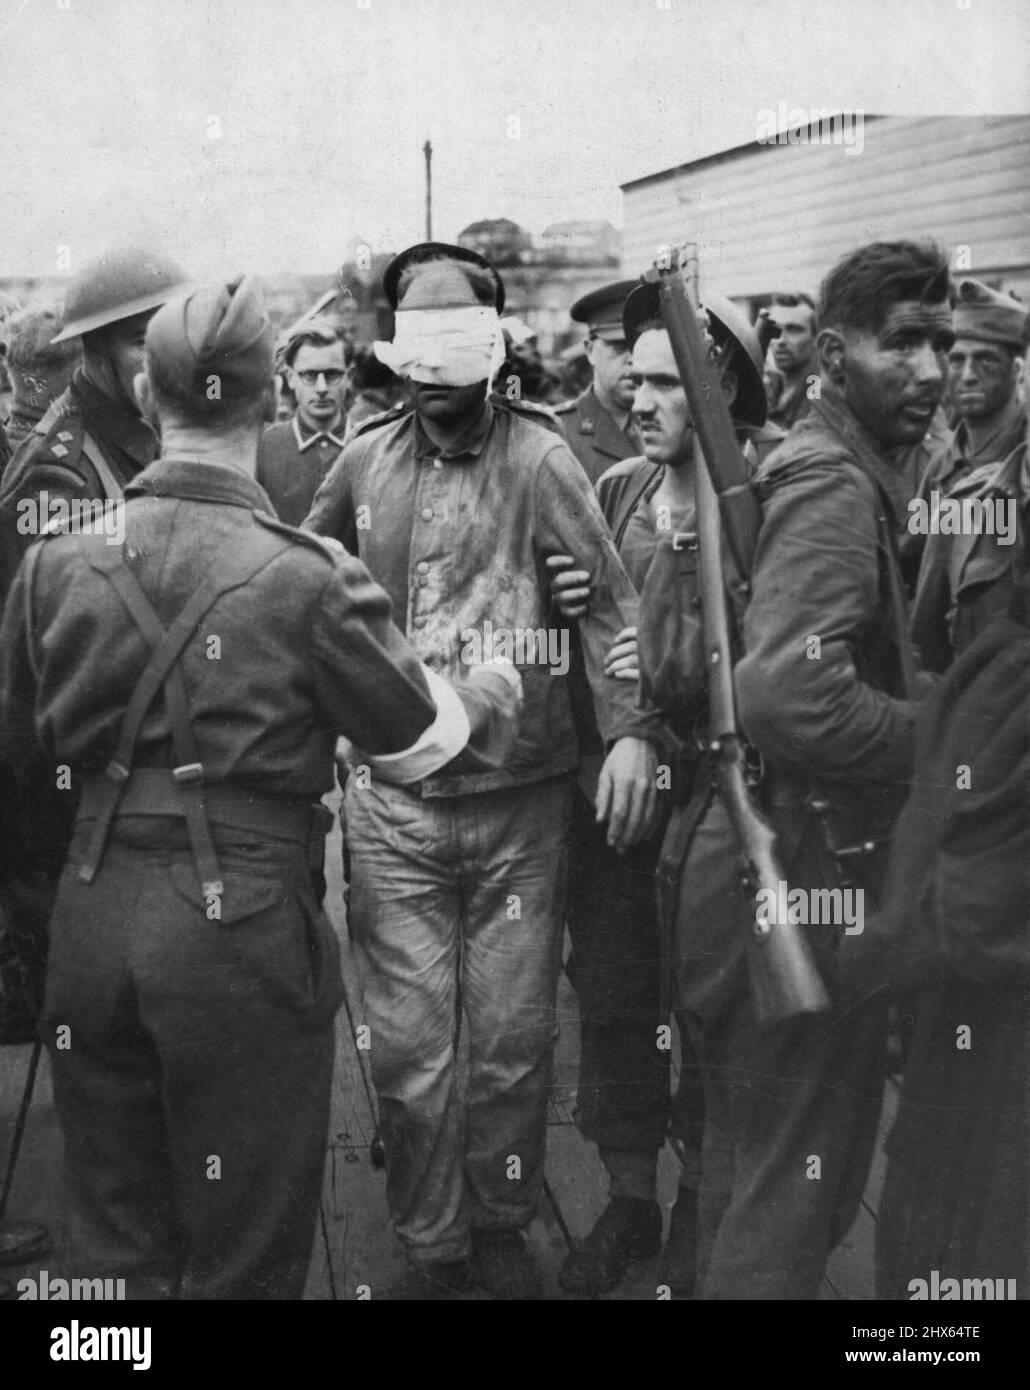 German prisoner being landed in England after Dieppe raid. October 11, 1942. (Photo by Sport & General Press Agency, Limited). Stock Photo